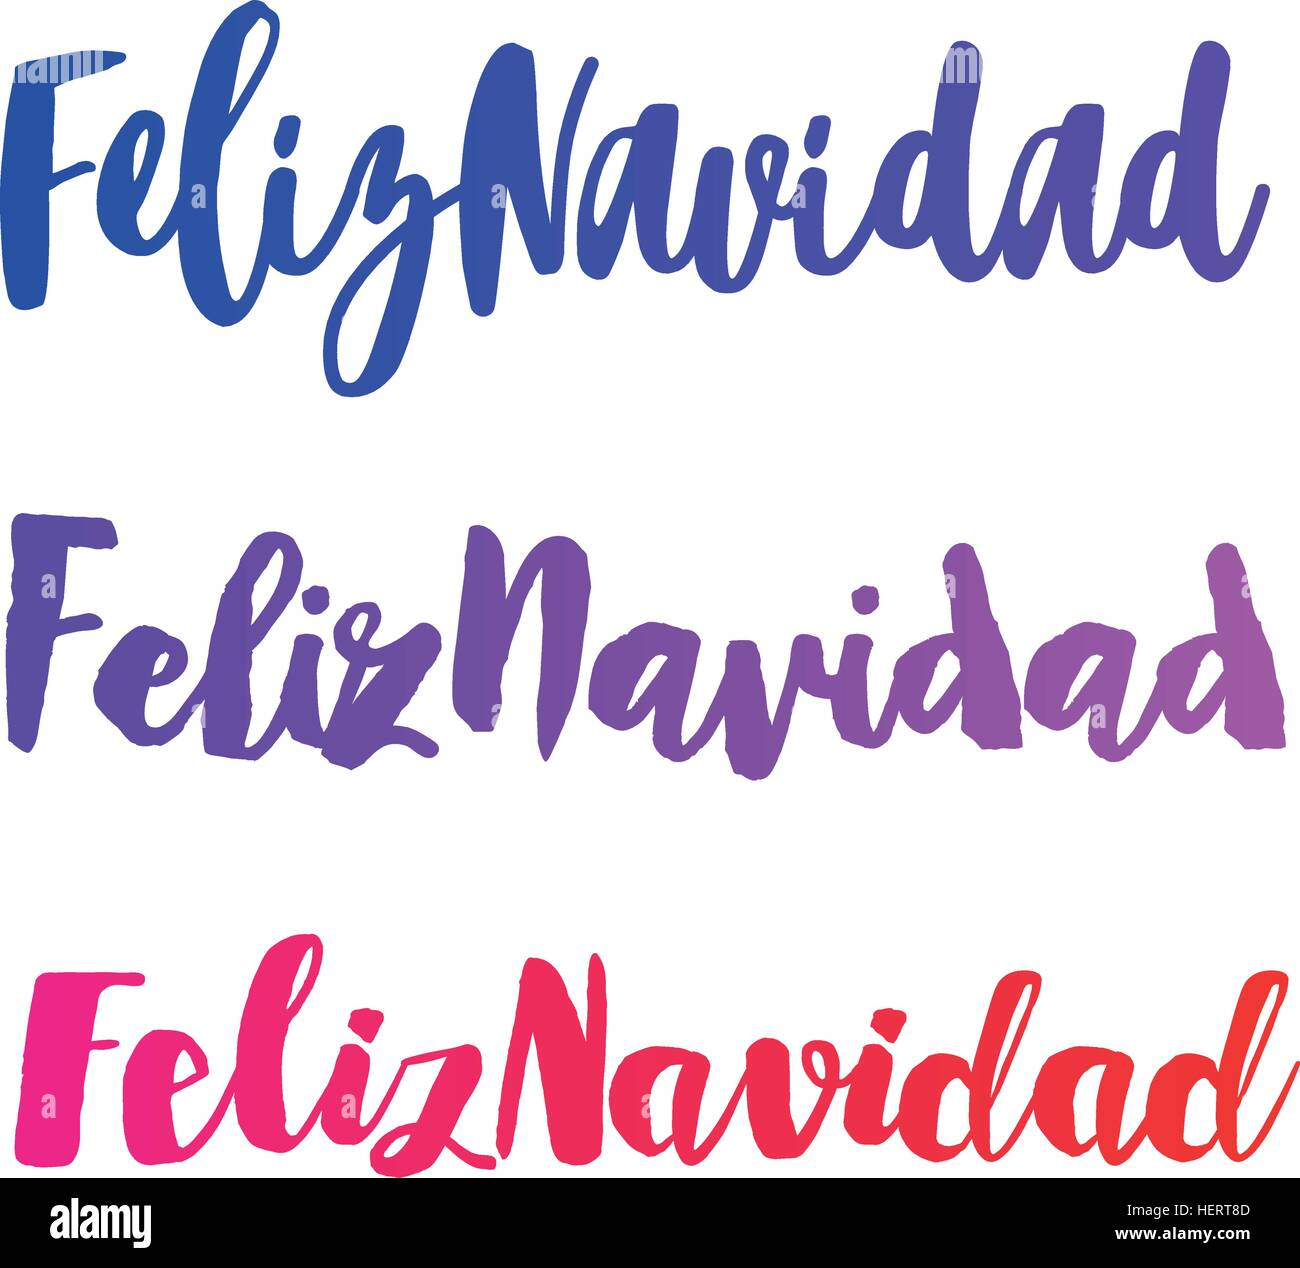 Feliz Navidad words set vector illustration. Lettering Christmas and New Year holiday calligraphy phrase isolated on the white background. Colorful Spanish greeting card. Stock Vector